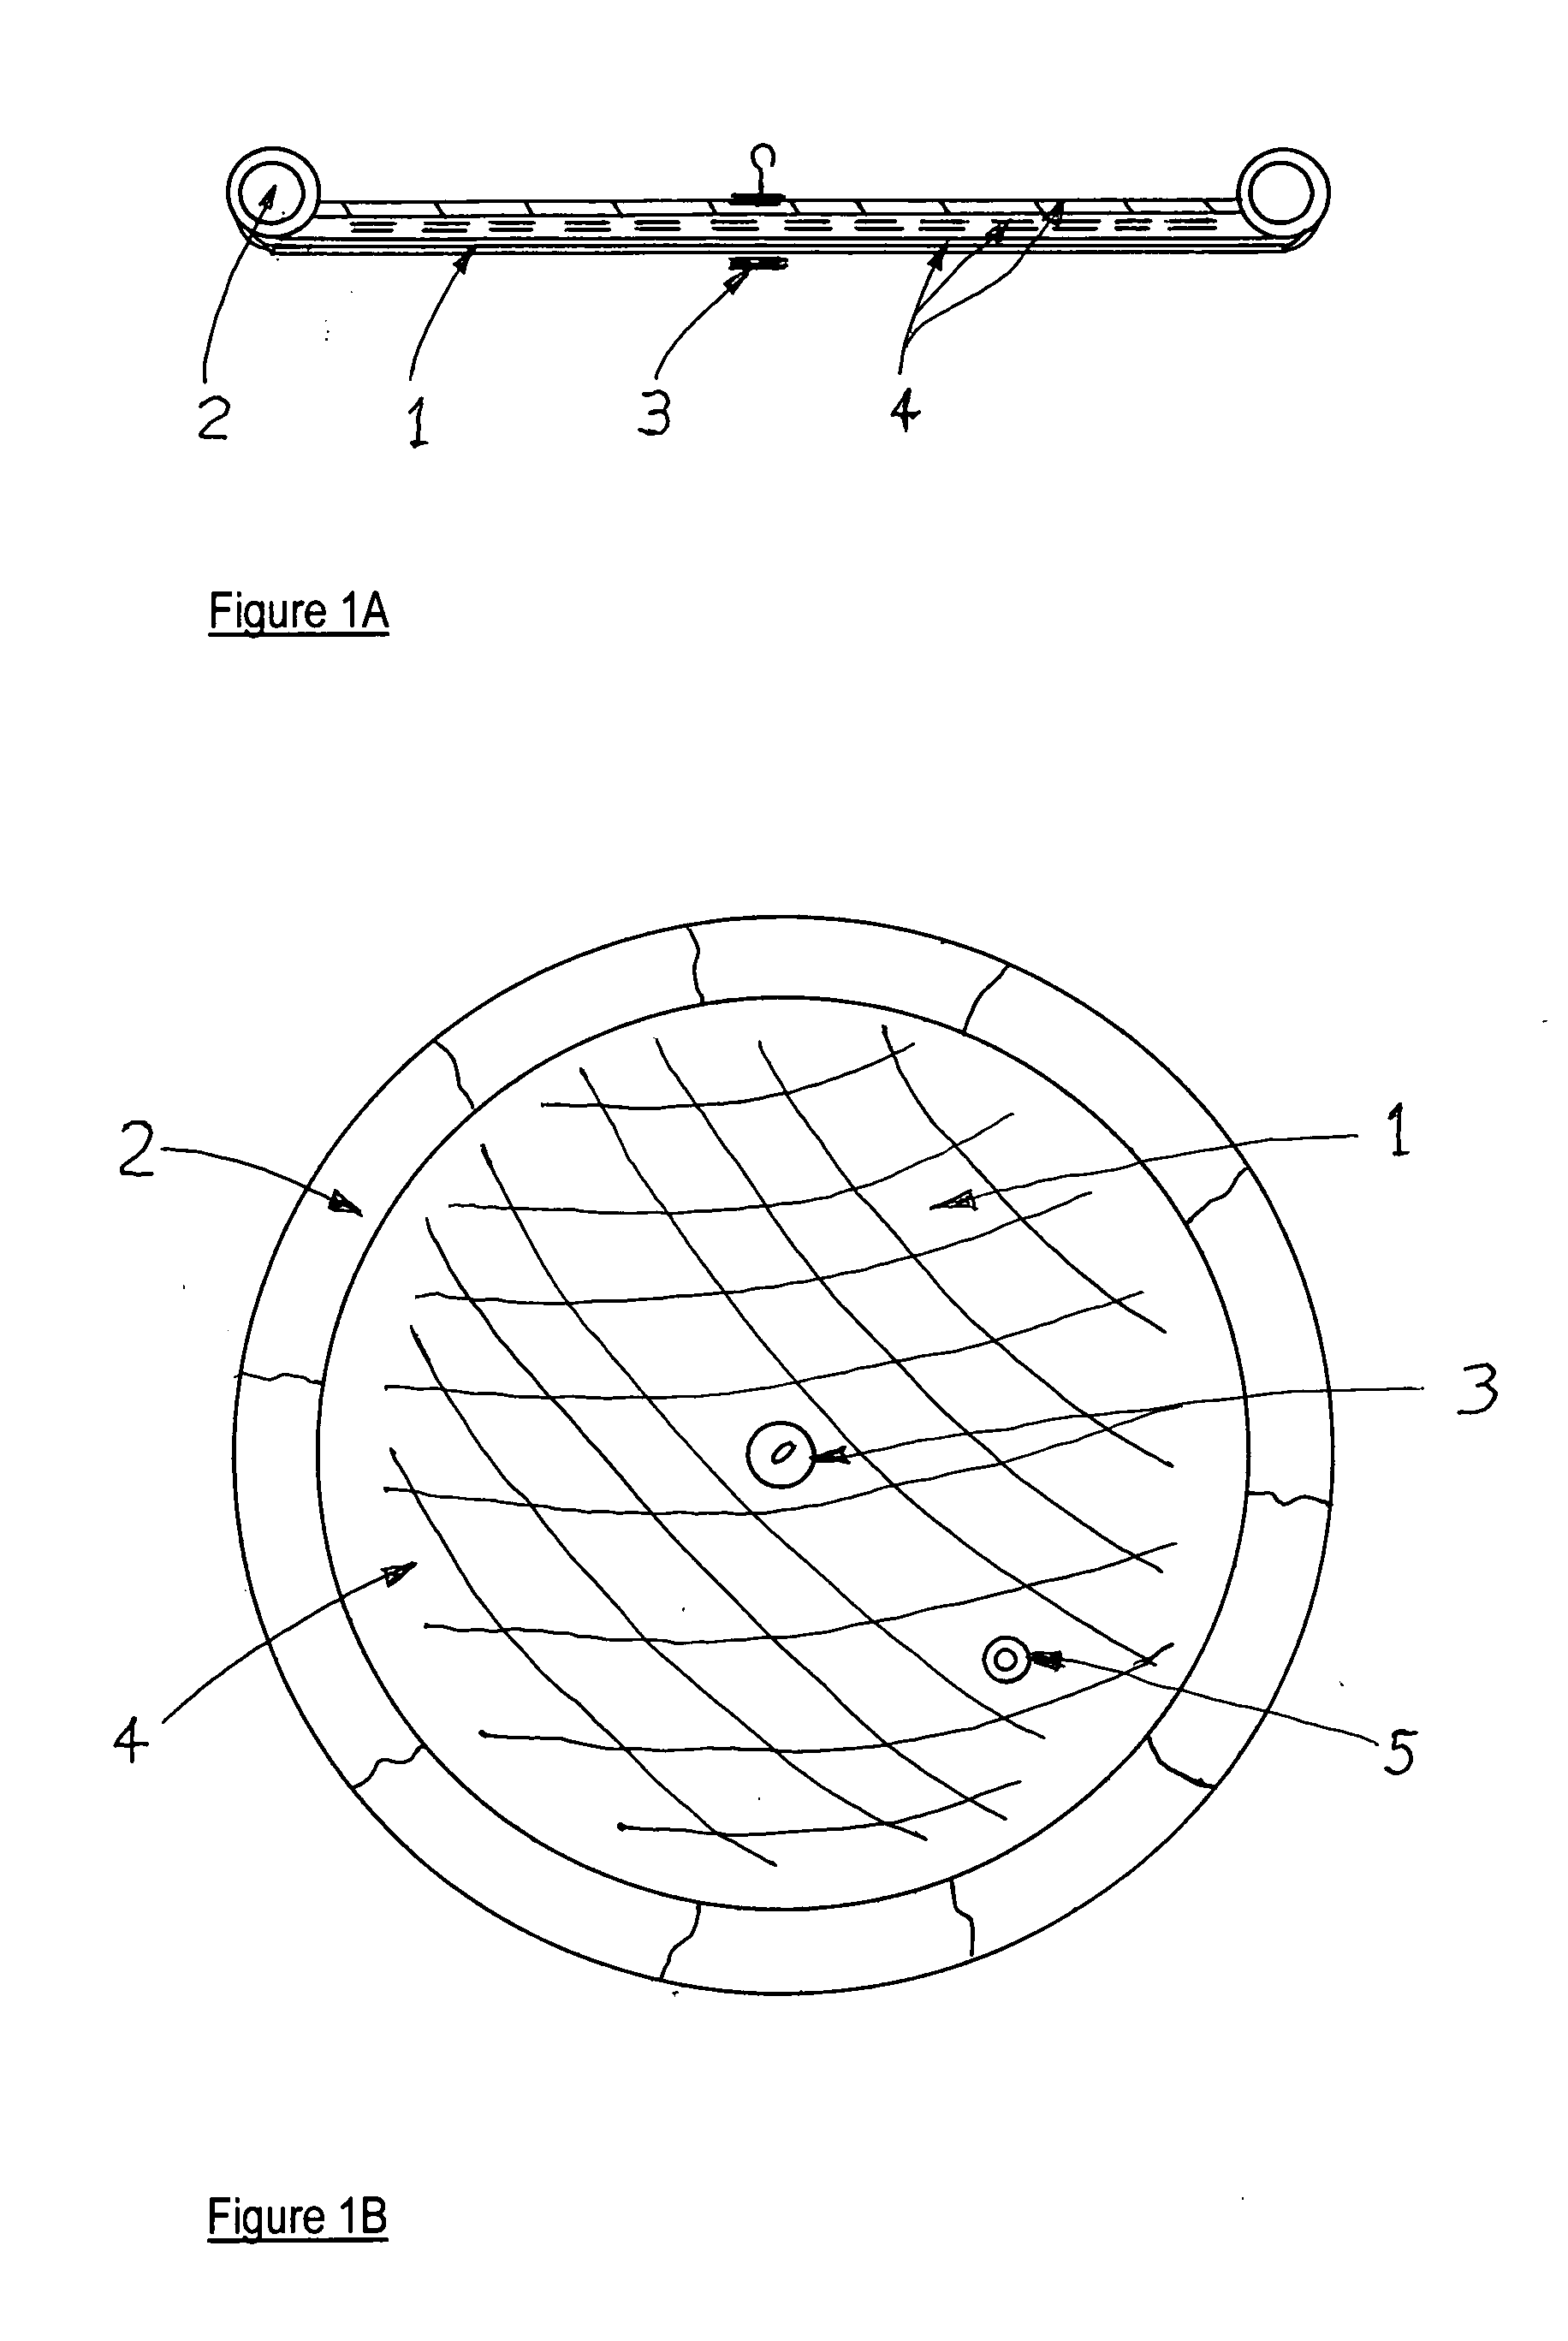 Process and Apparatus for Sealing Wellhead Leaks Underwater or On Land